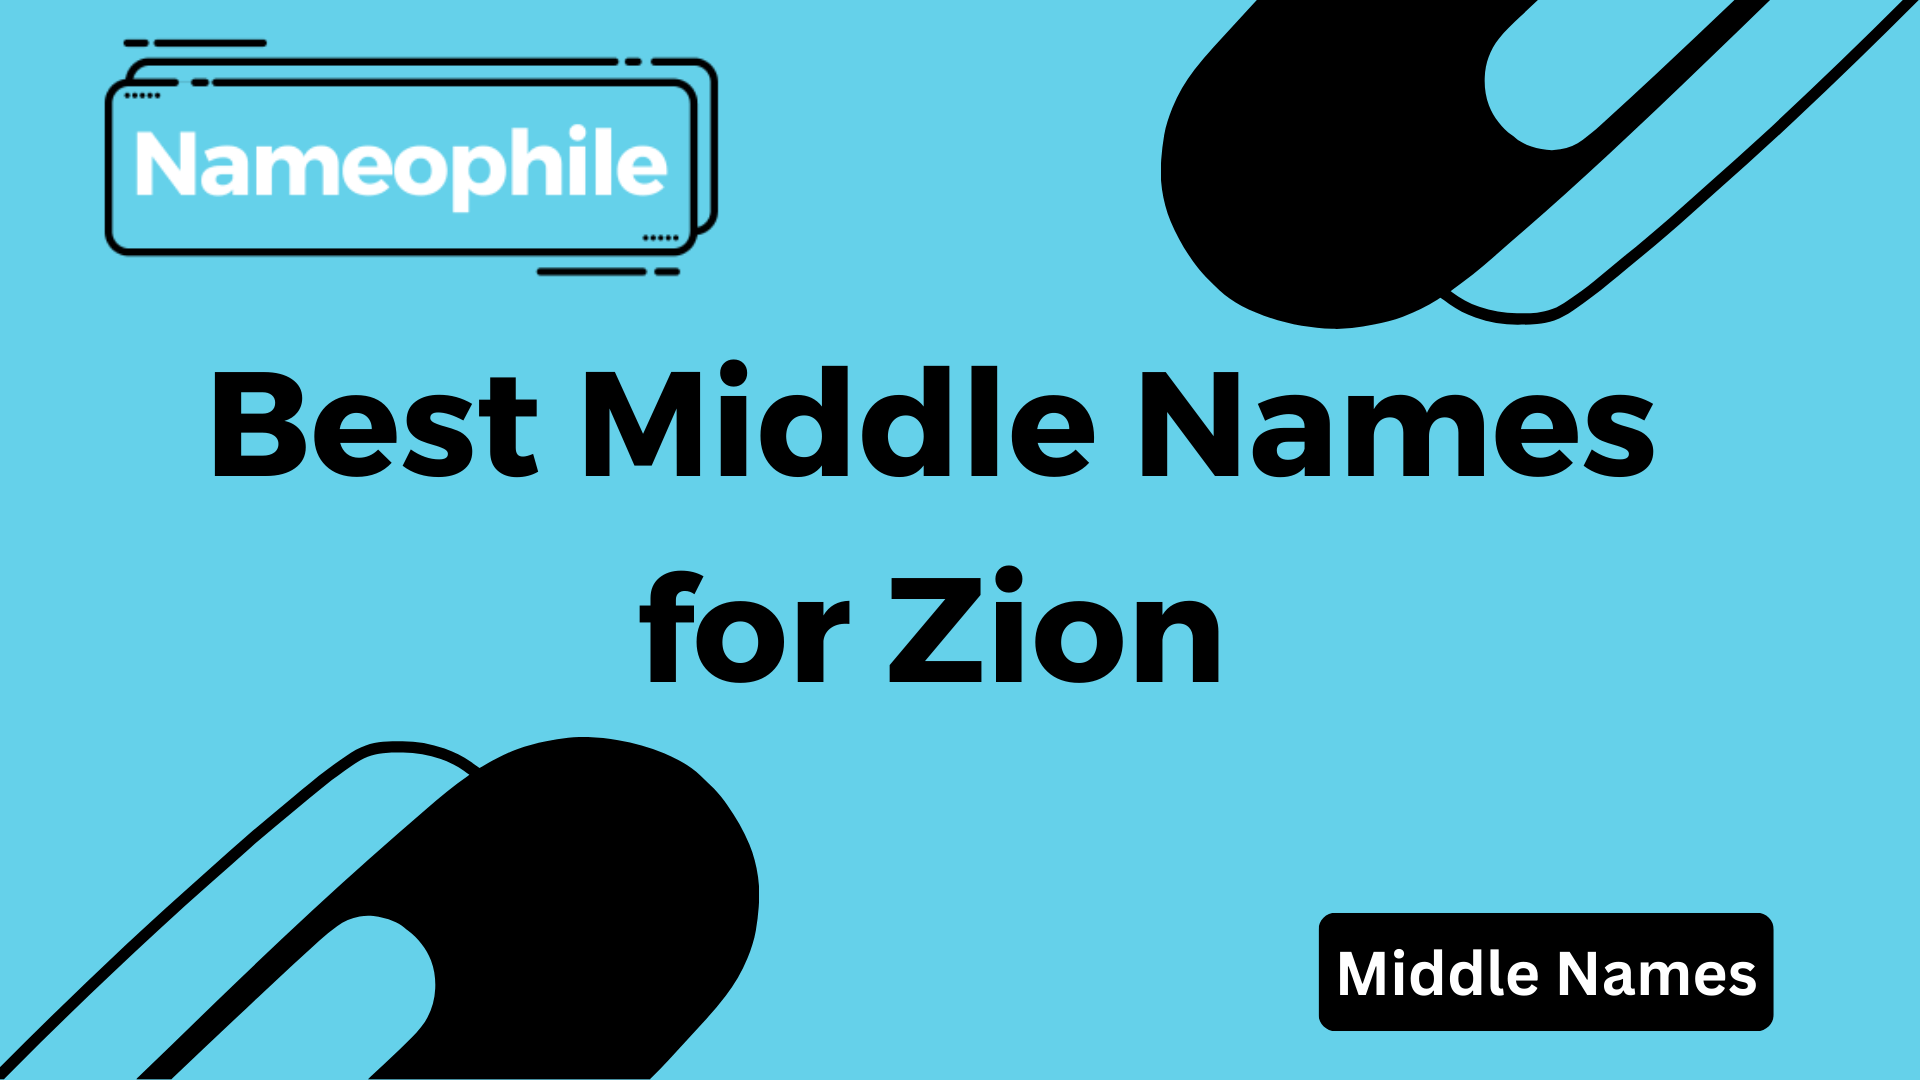 Best Middle Names for Zion